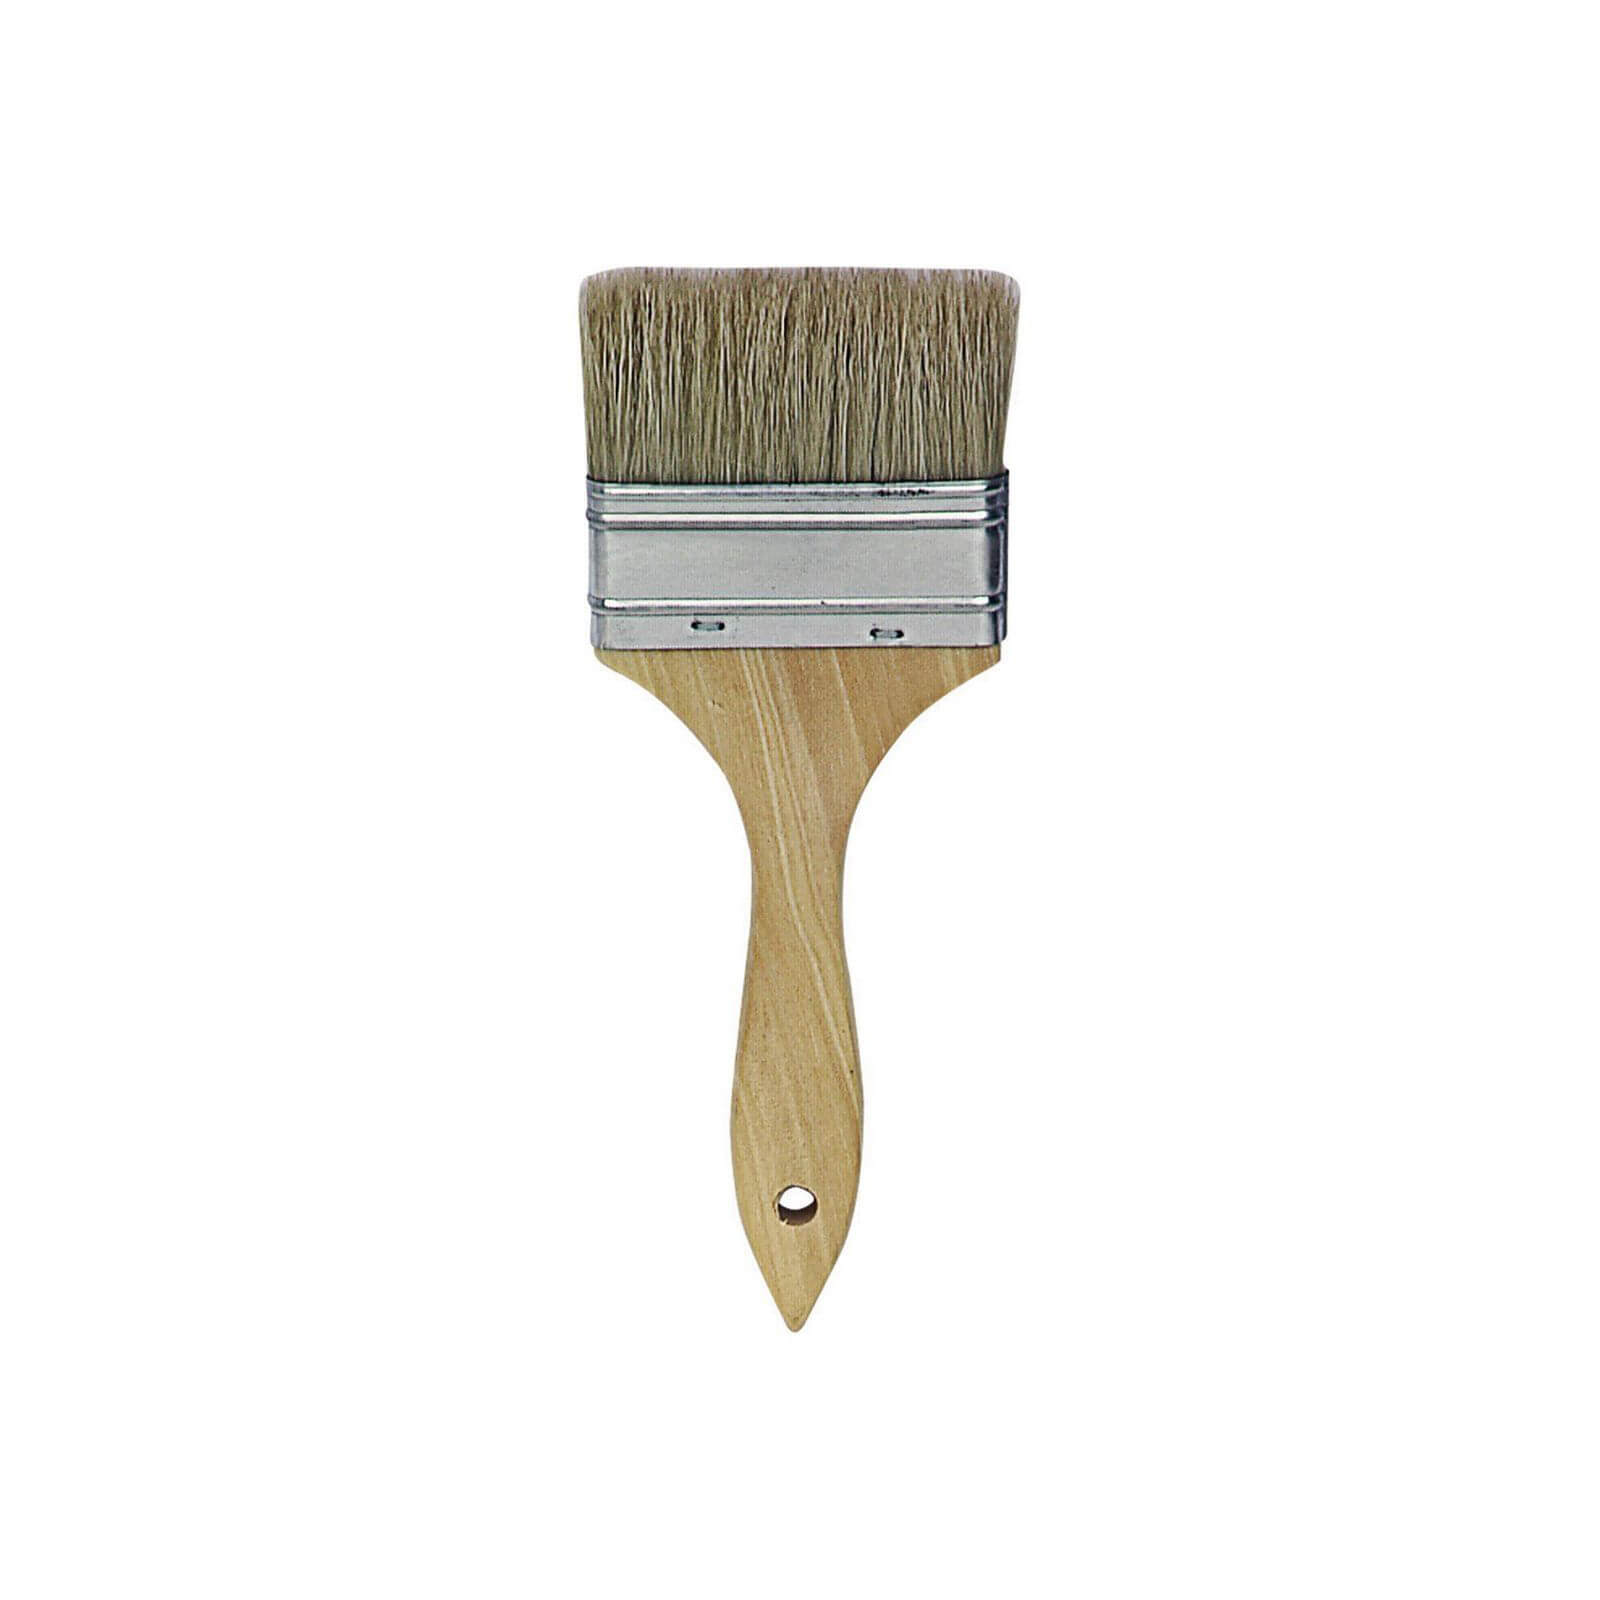 Chip Brushes - Rossi Paint Stores - Single Thick - 3"